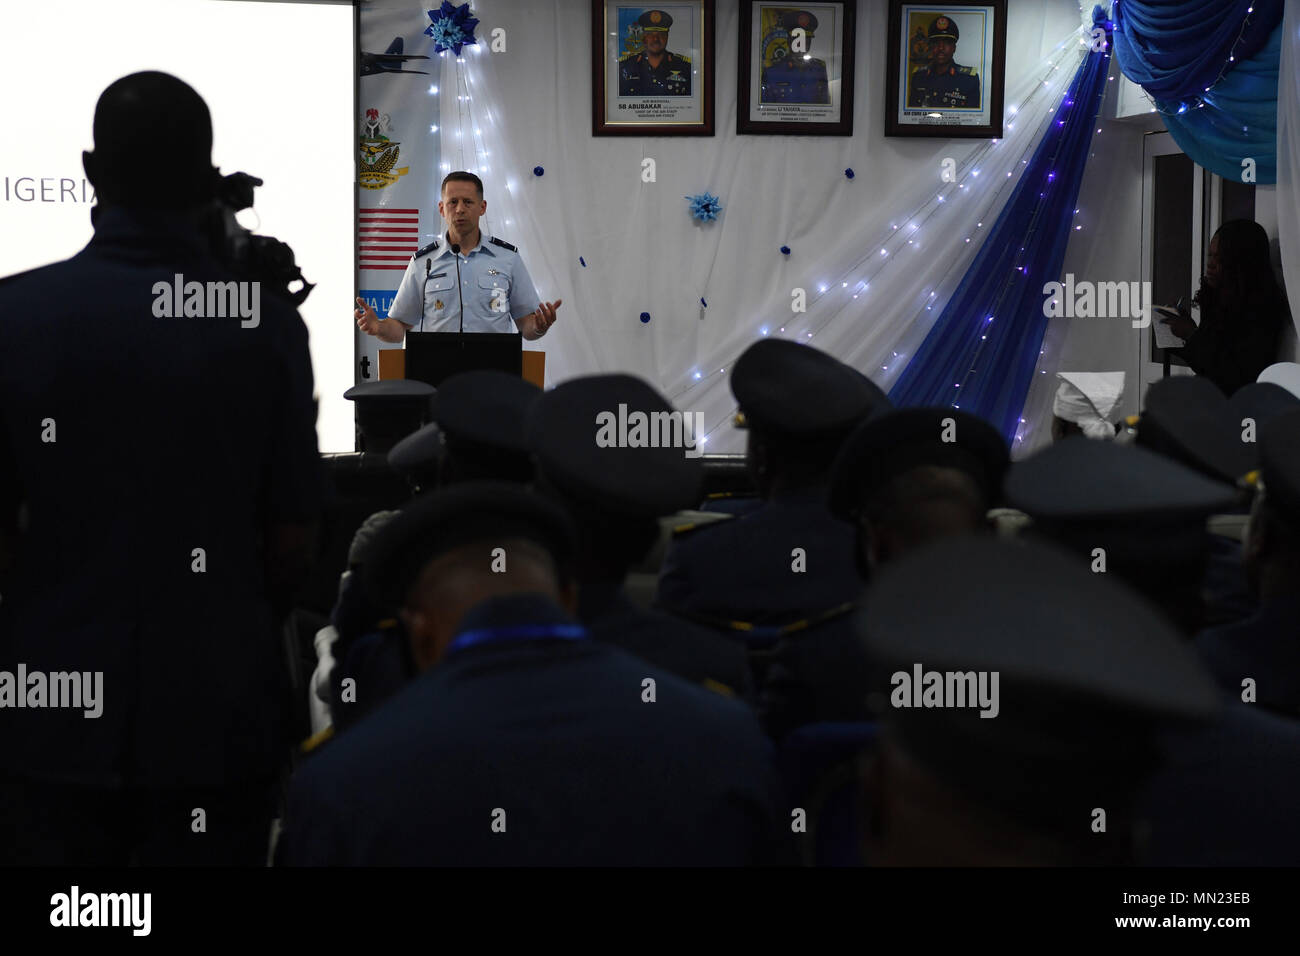 U.S. Air Force Brig. Gen. Dieter E. Bareihs, U.S. Air Forces Europe - Air Forces Africa Plans, Programs, and Analyses director, gives a keynote speech at the African Partnership Flight Nigeria opening ceremony, Ikeja Air Base, Lagos, Nigeria, Aug. 14, 2017. Approximately 60 personnel from Nigeria, Niger, Chad, and Benin air forces partnered for the week-long workshop to strengthen regional air partnerships in a collaborative learning environment that synergizes the expertise of the United States and African partner nations. (U.S. Air Force Staff Sgt. Rachelle Coleman) Stock Photo